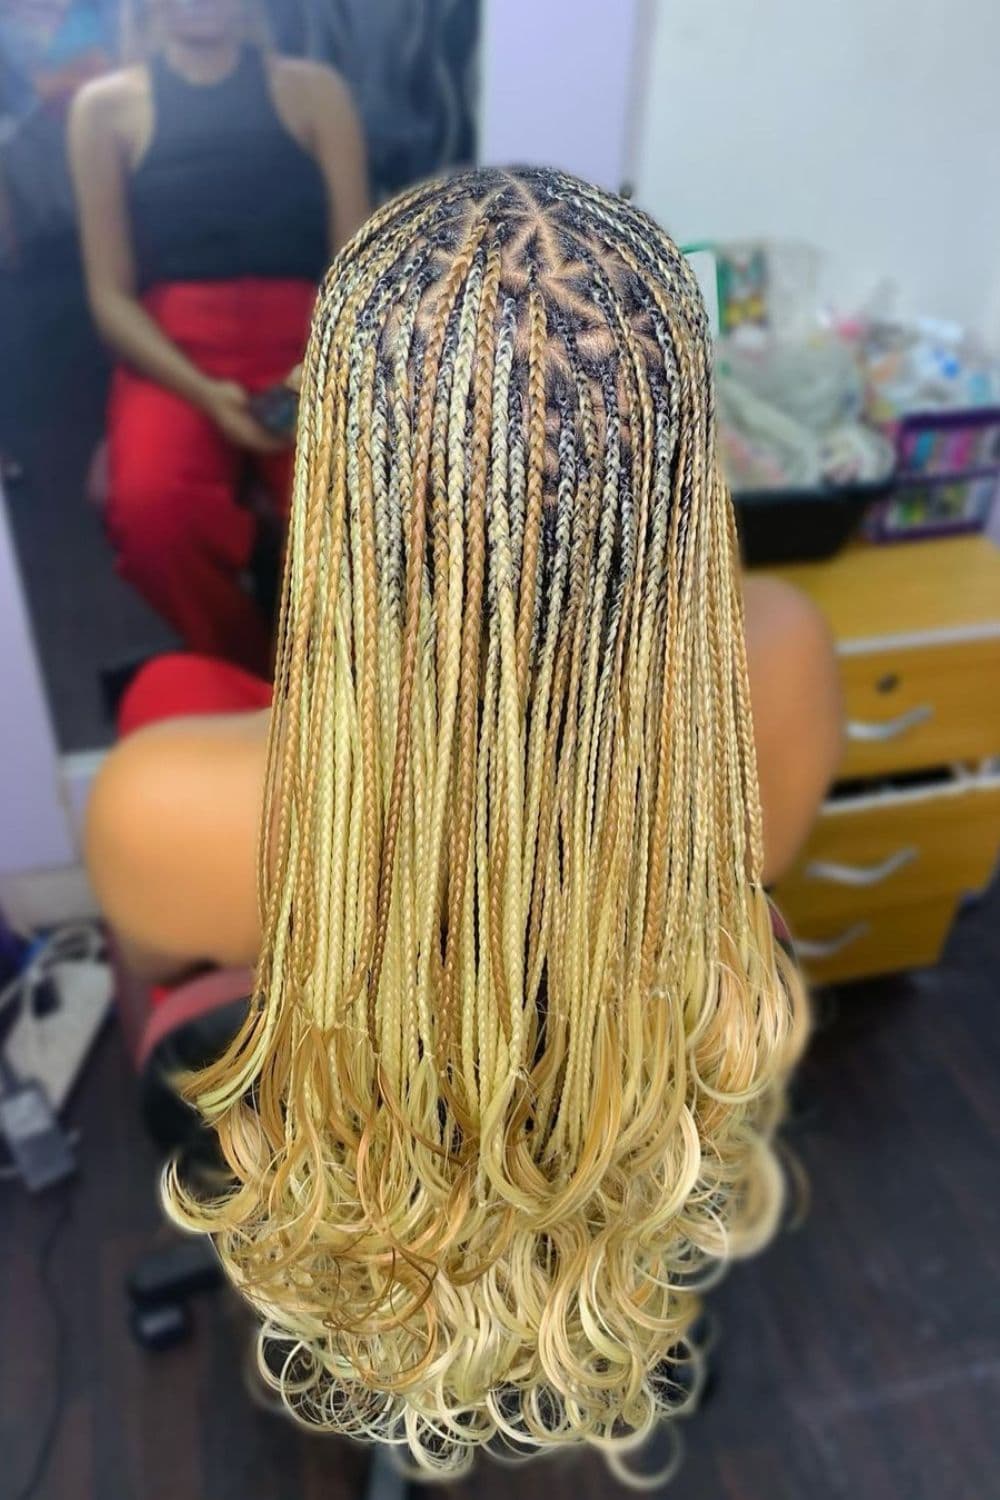 A woman with tri-colored blonde knotless braids.